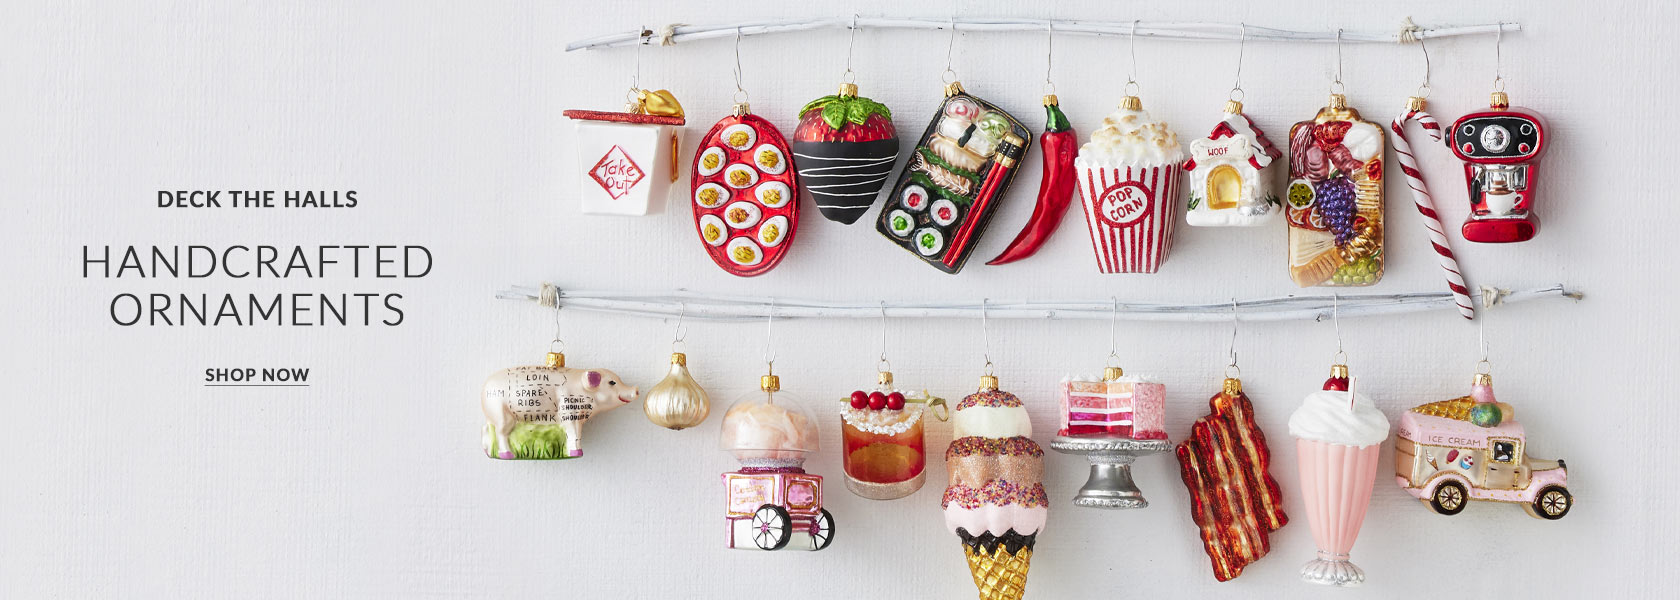 Deck the halls. Handcrafted ornaments. Shop Now.